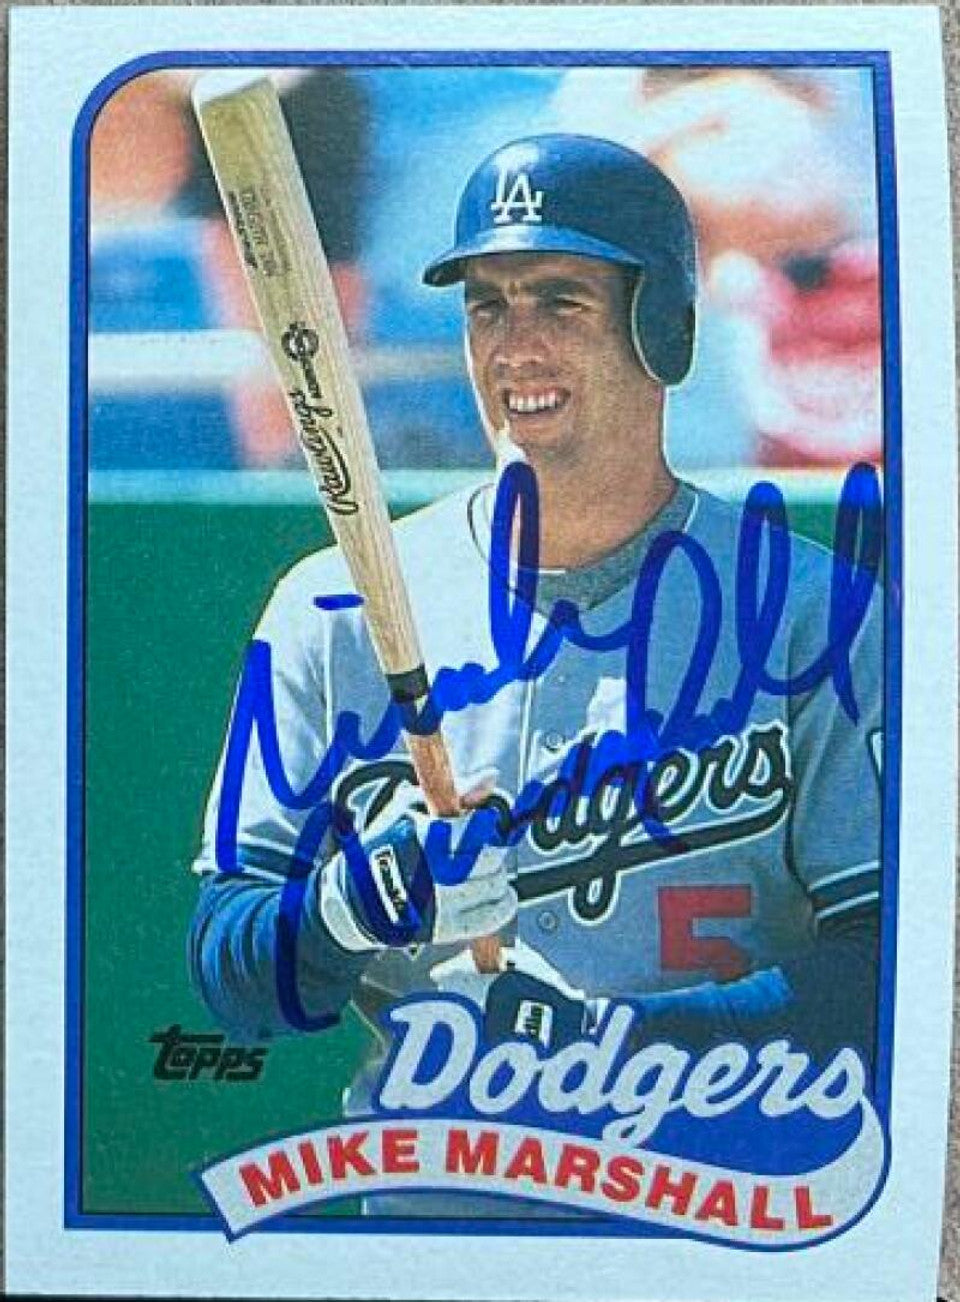 Mike Marshall Signed 1989 Topps Baseball Card - Los Angeles Dodgers